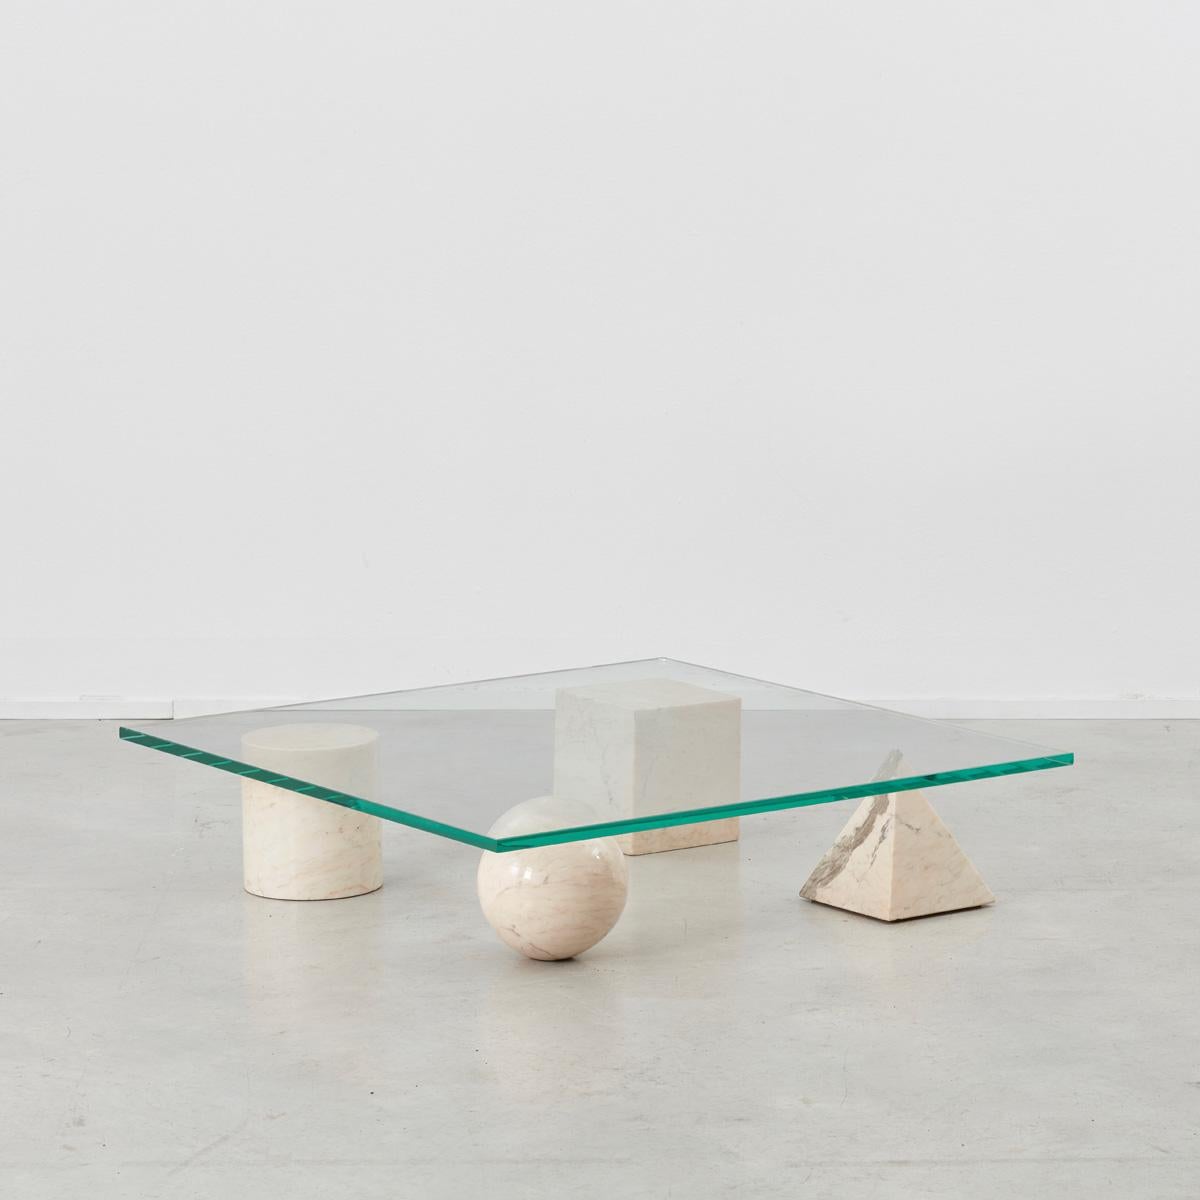 A stunning and sculptural Metafora coffee table designed by Lella and Massimo Vignelli. Inspired by the four forms of Euclidean geometry, the cube, the pyramid, the cylinder and the sphere, the four elements can be positioned freely for a unique